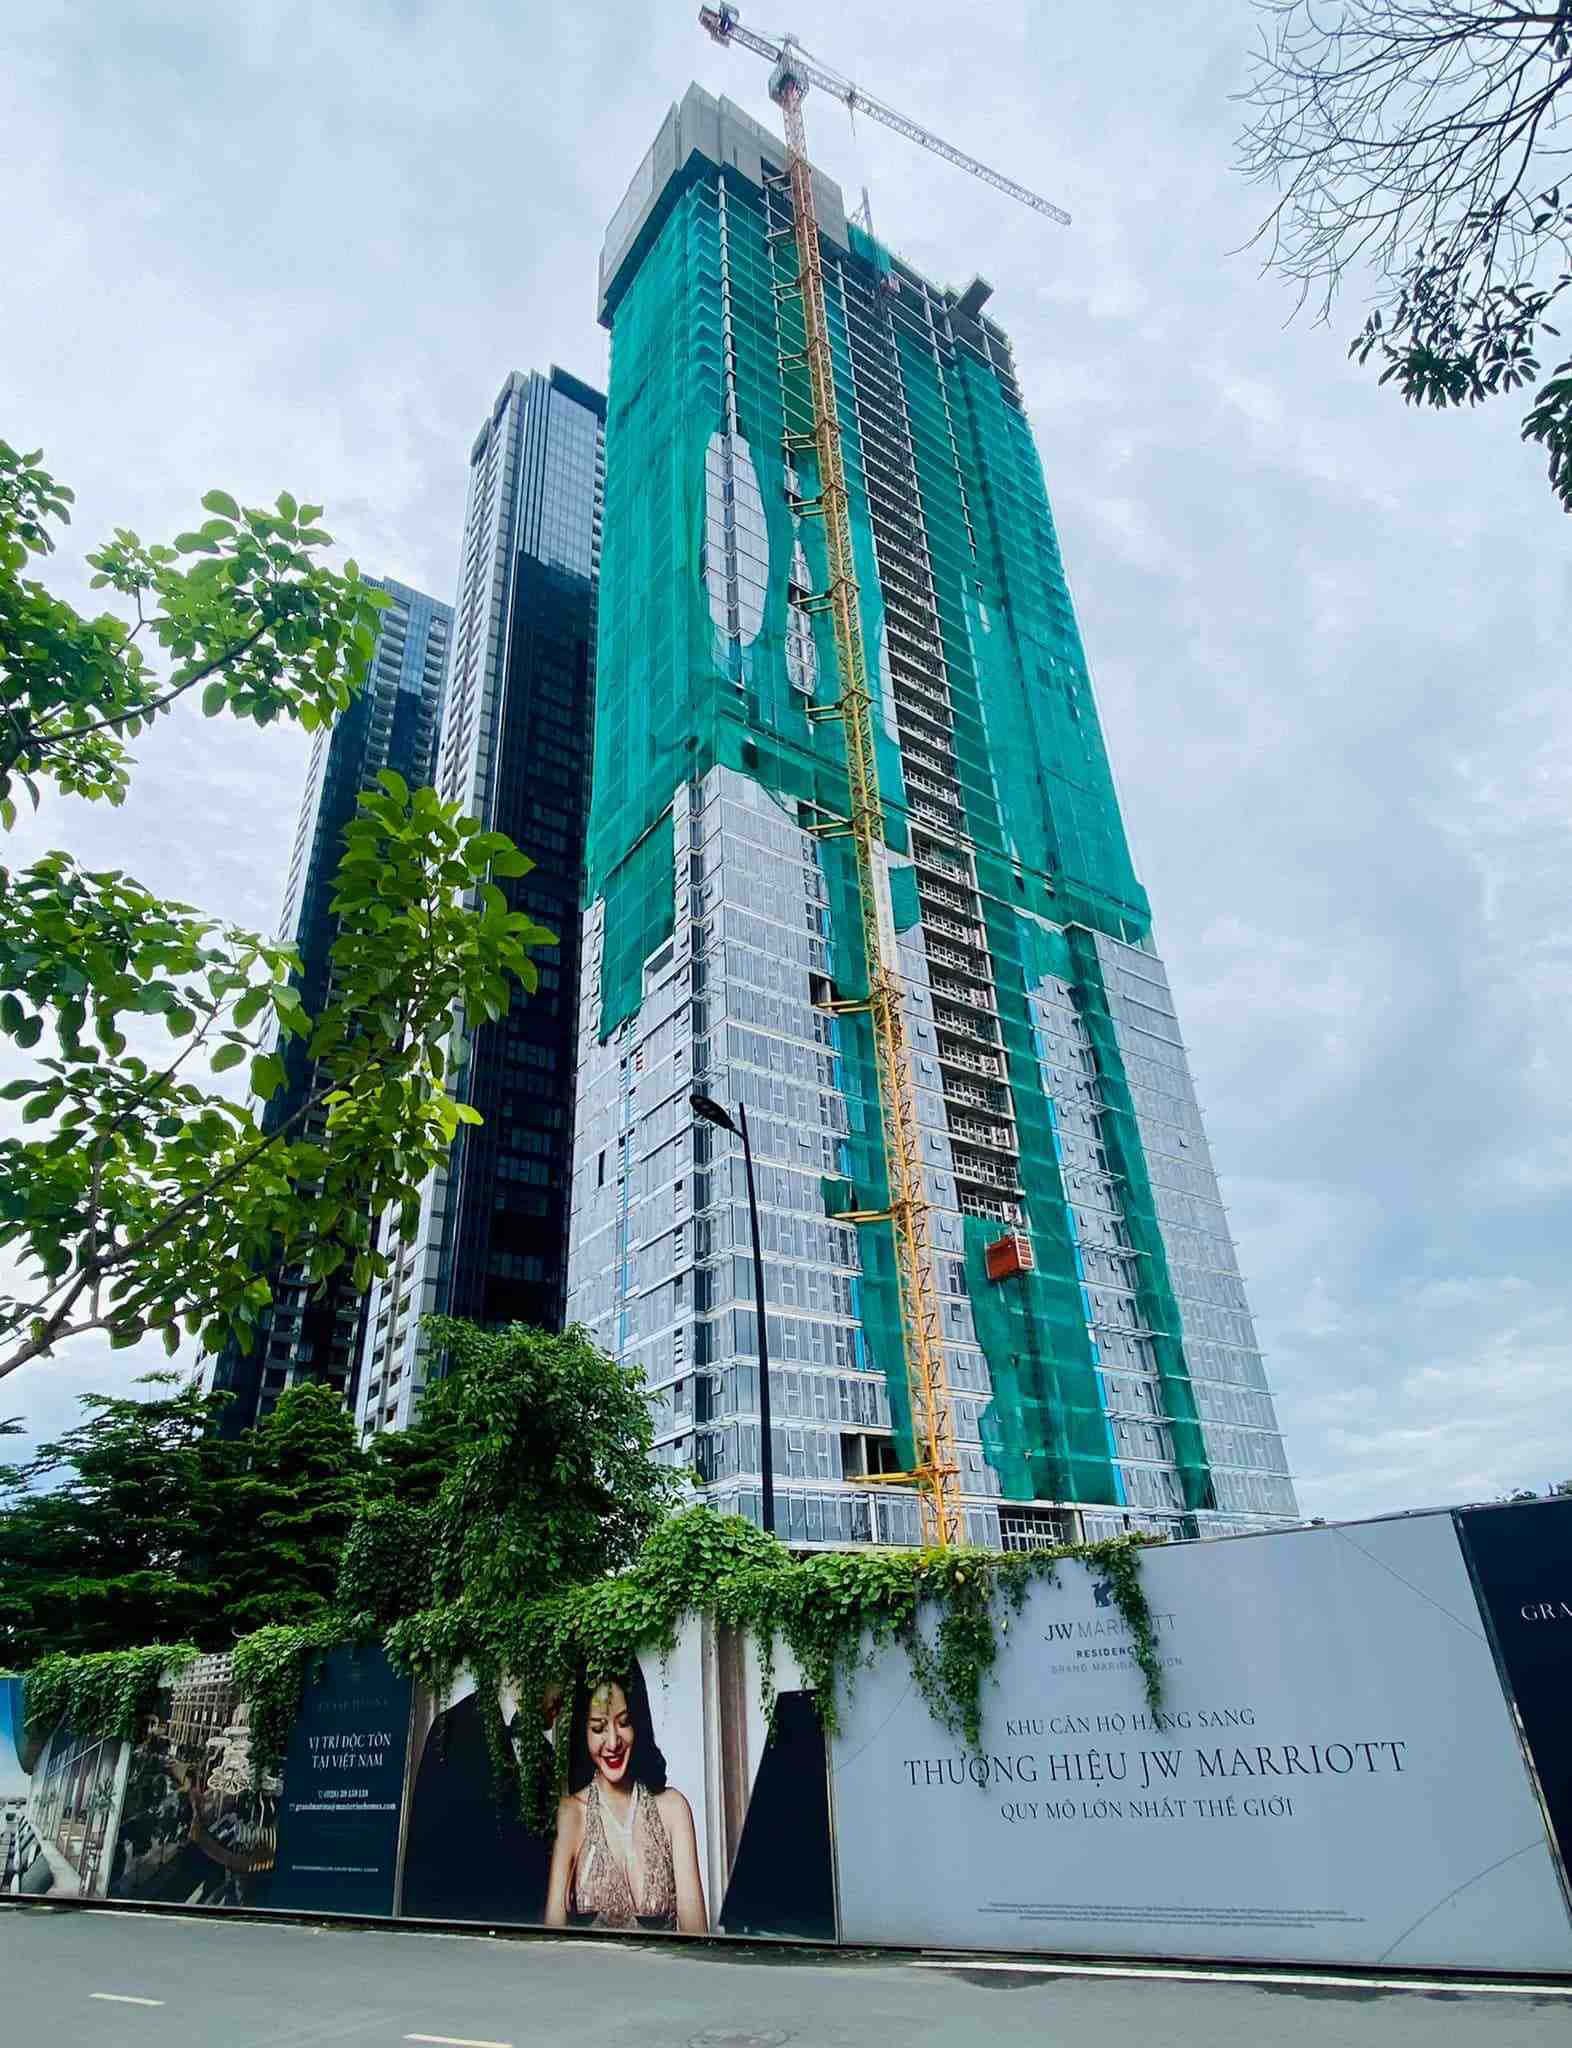 Update the progress of the Grand Marina, Saigon luxury apartment project in July 2022